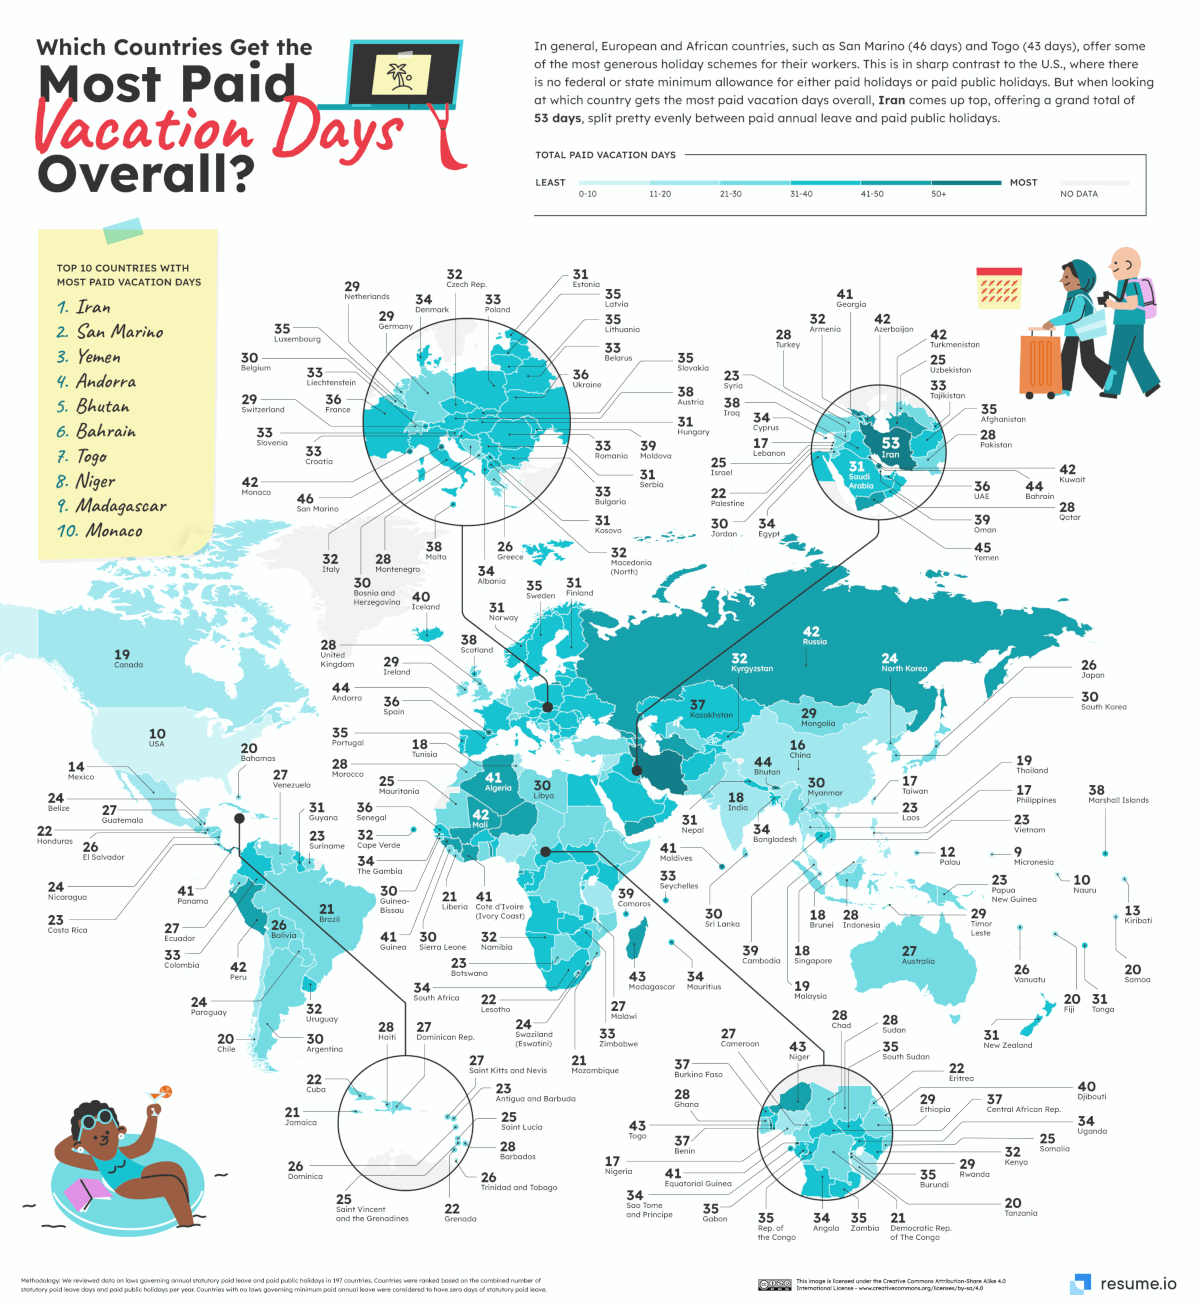 Resume.io visual on countries with the most paid vacation days overall